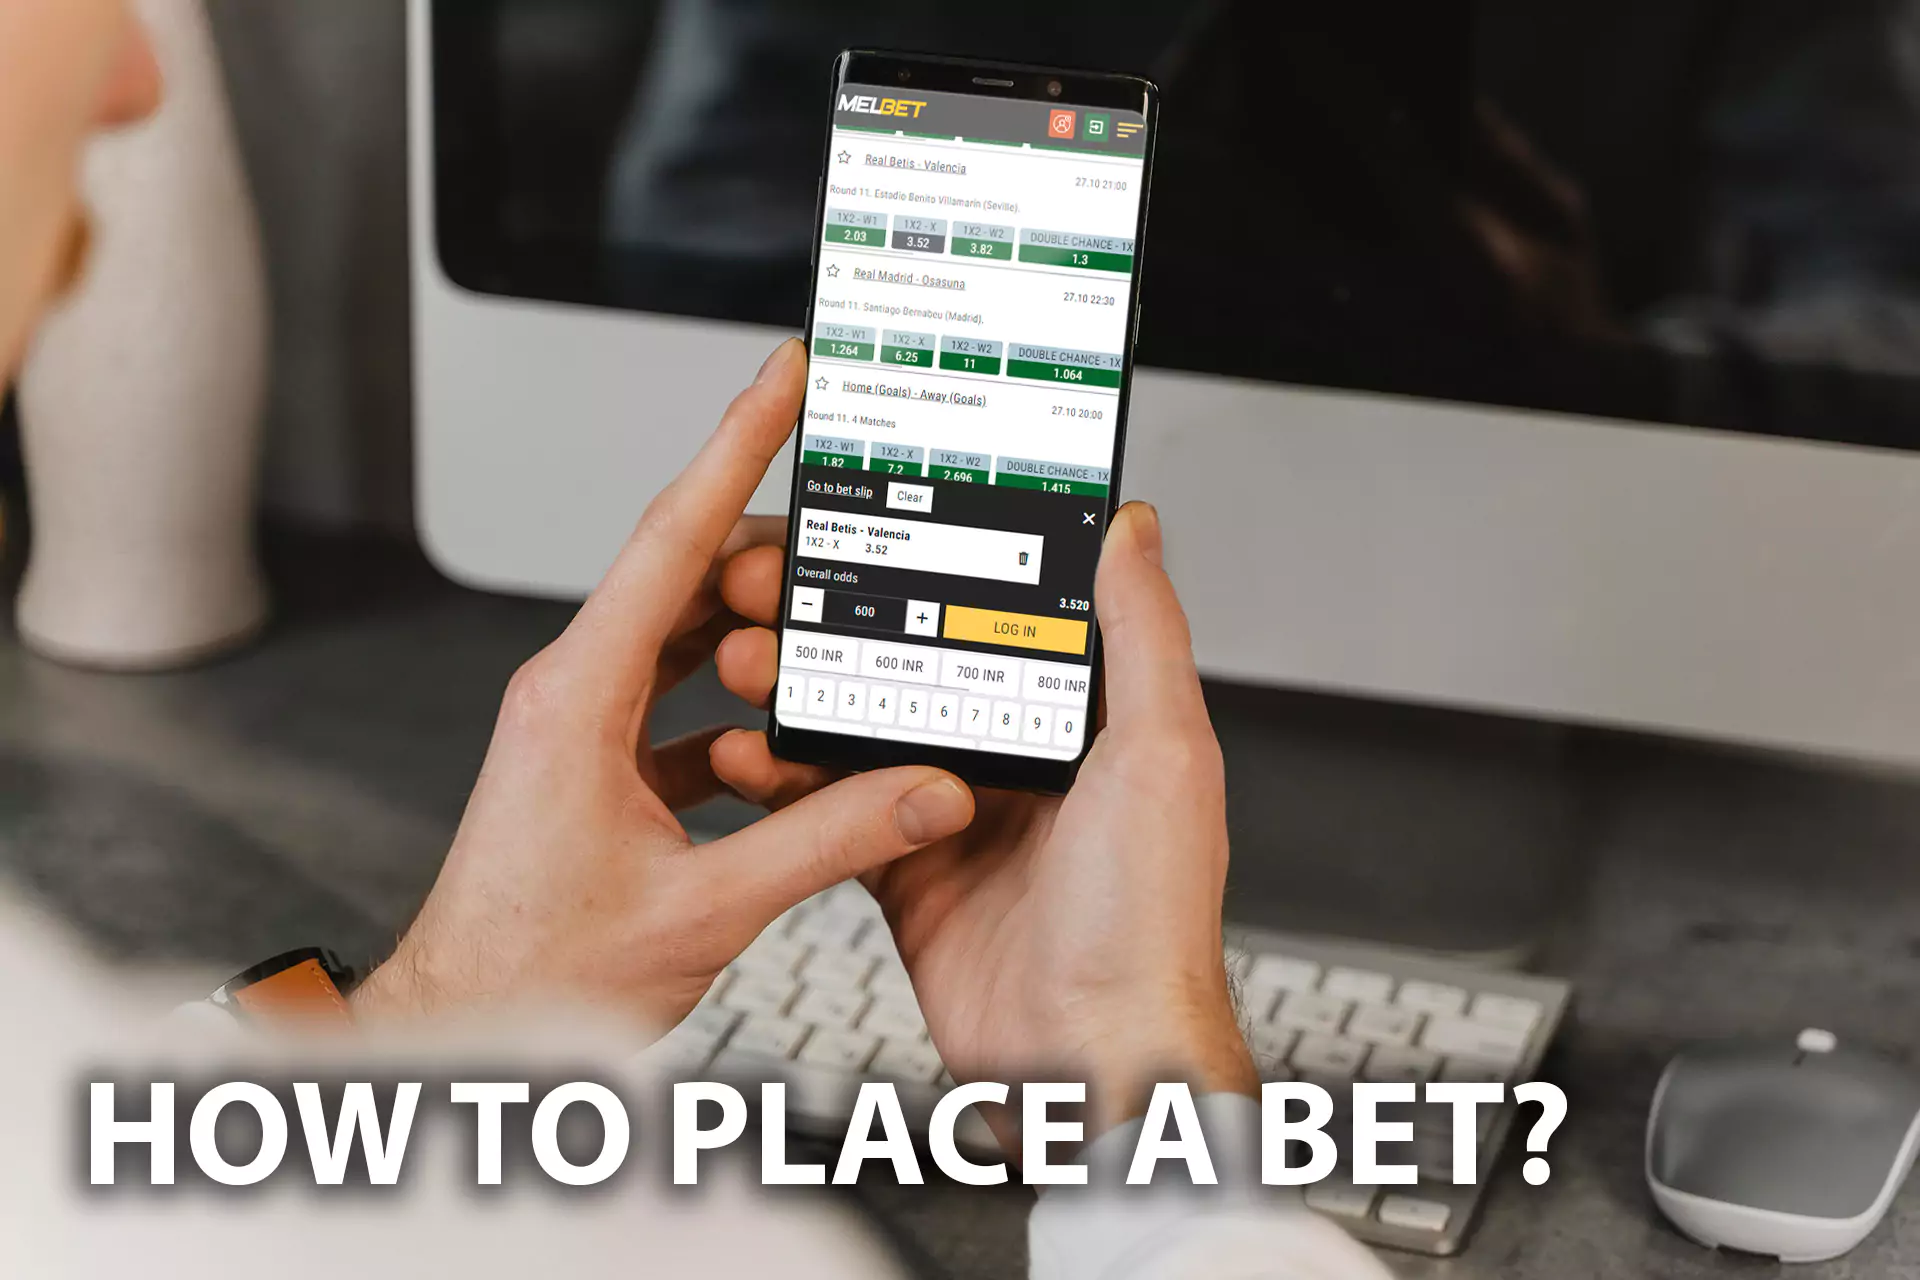 Choose a sports event you like the most and place a bet.